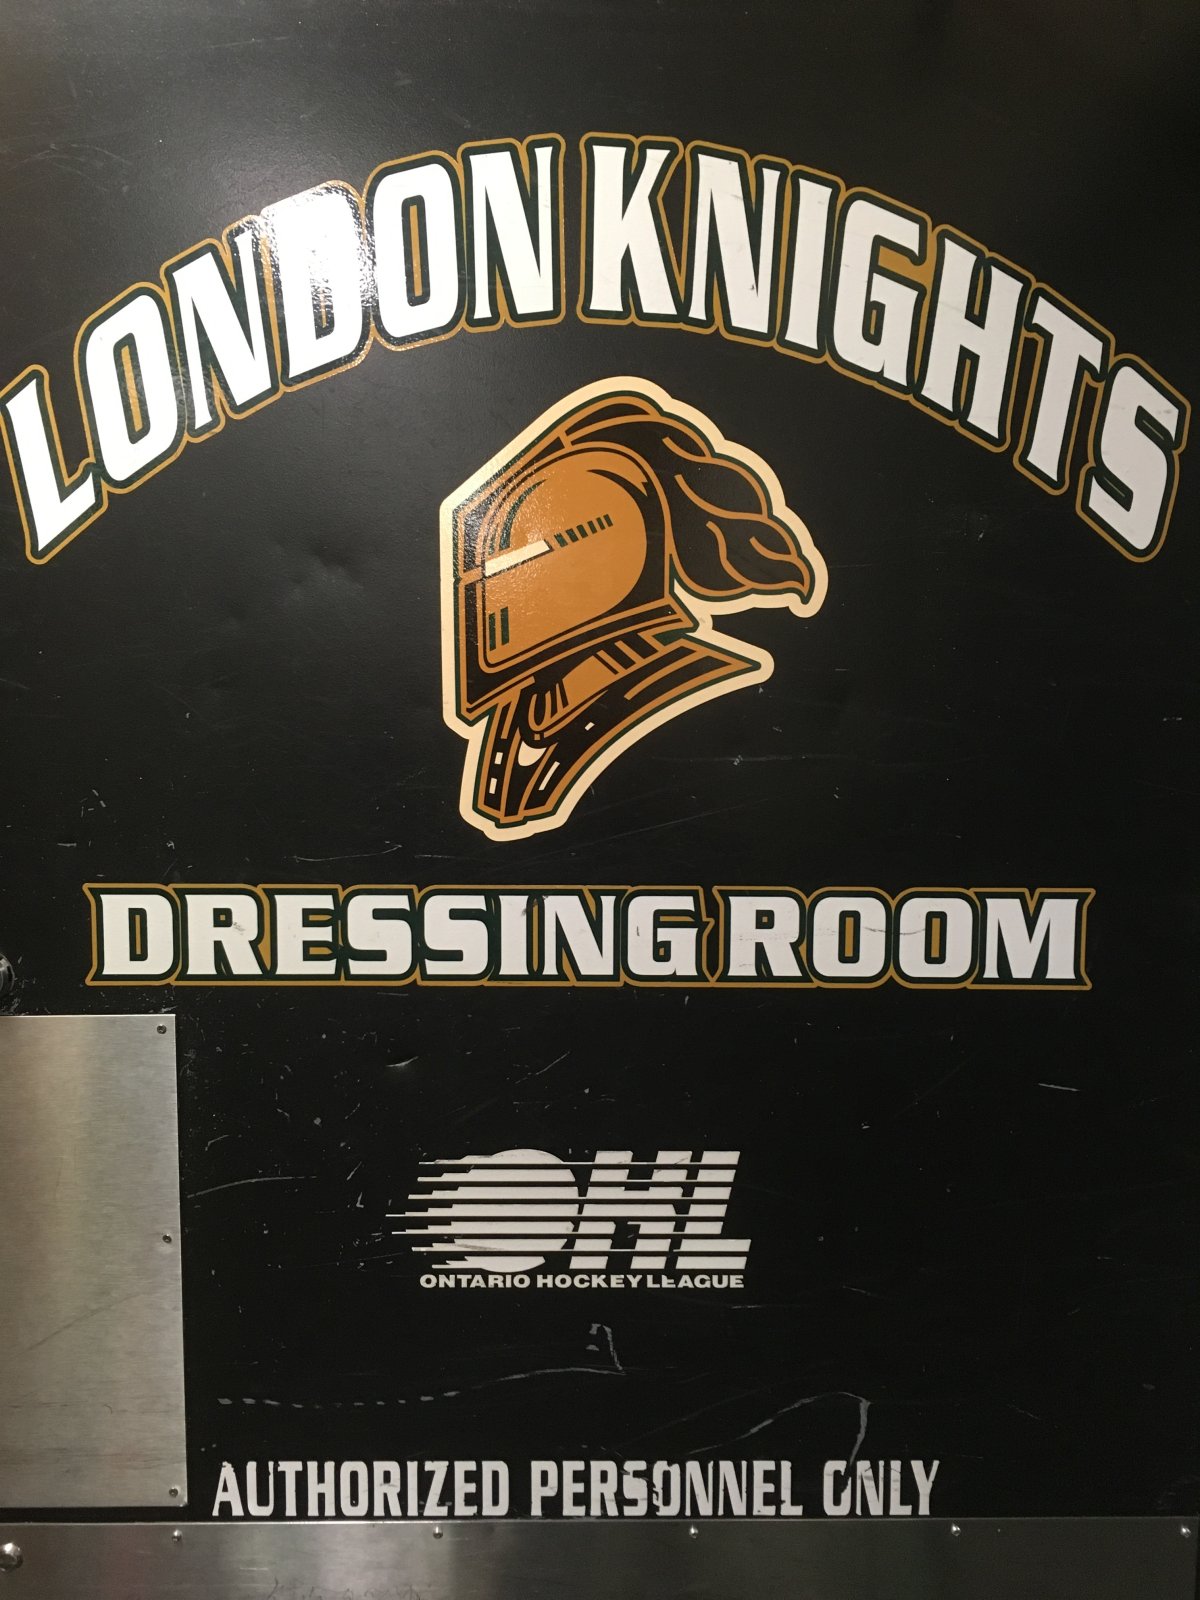 Coome’s climb: London Knights’ defenceman on a new path - image